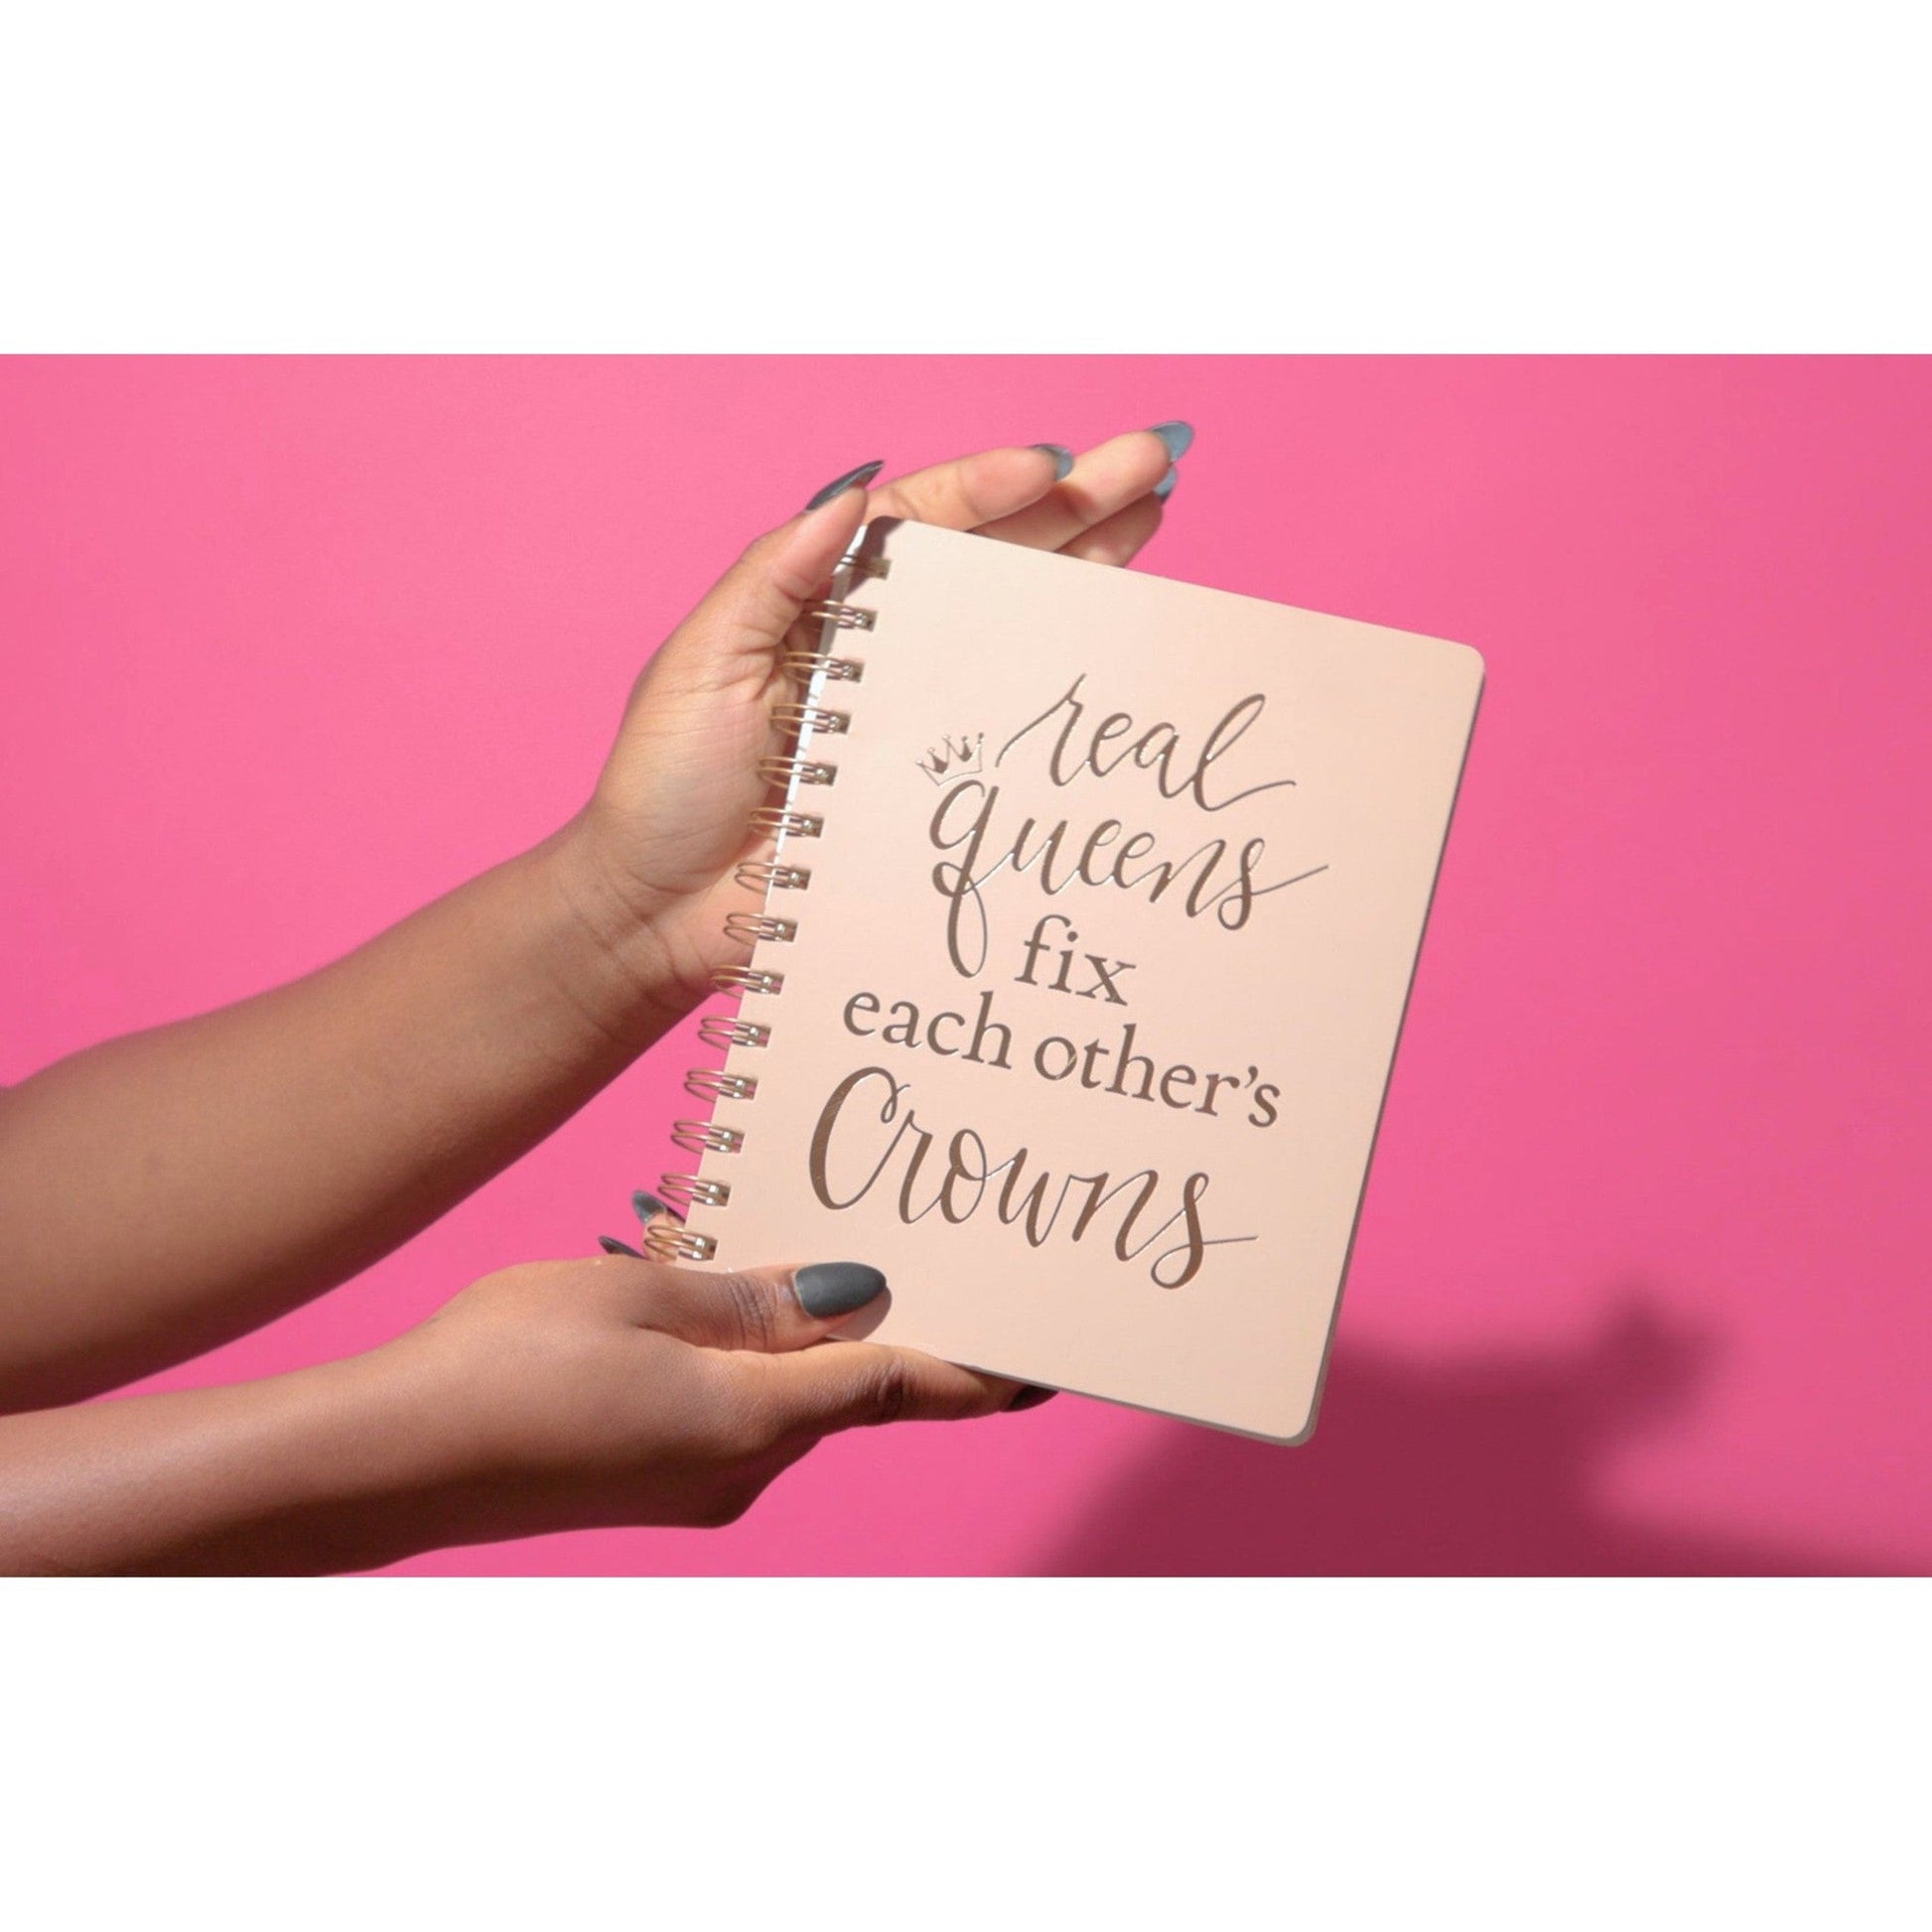 Real Queens Fix Each Other's Crowns Spiral Notebook in Blush Palette | 5.75" x 7.5" | 120 Lined Pages